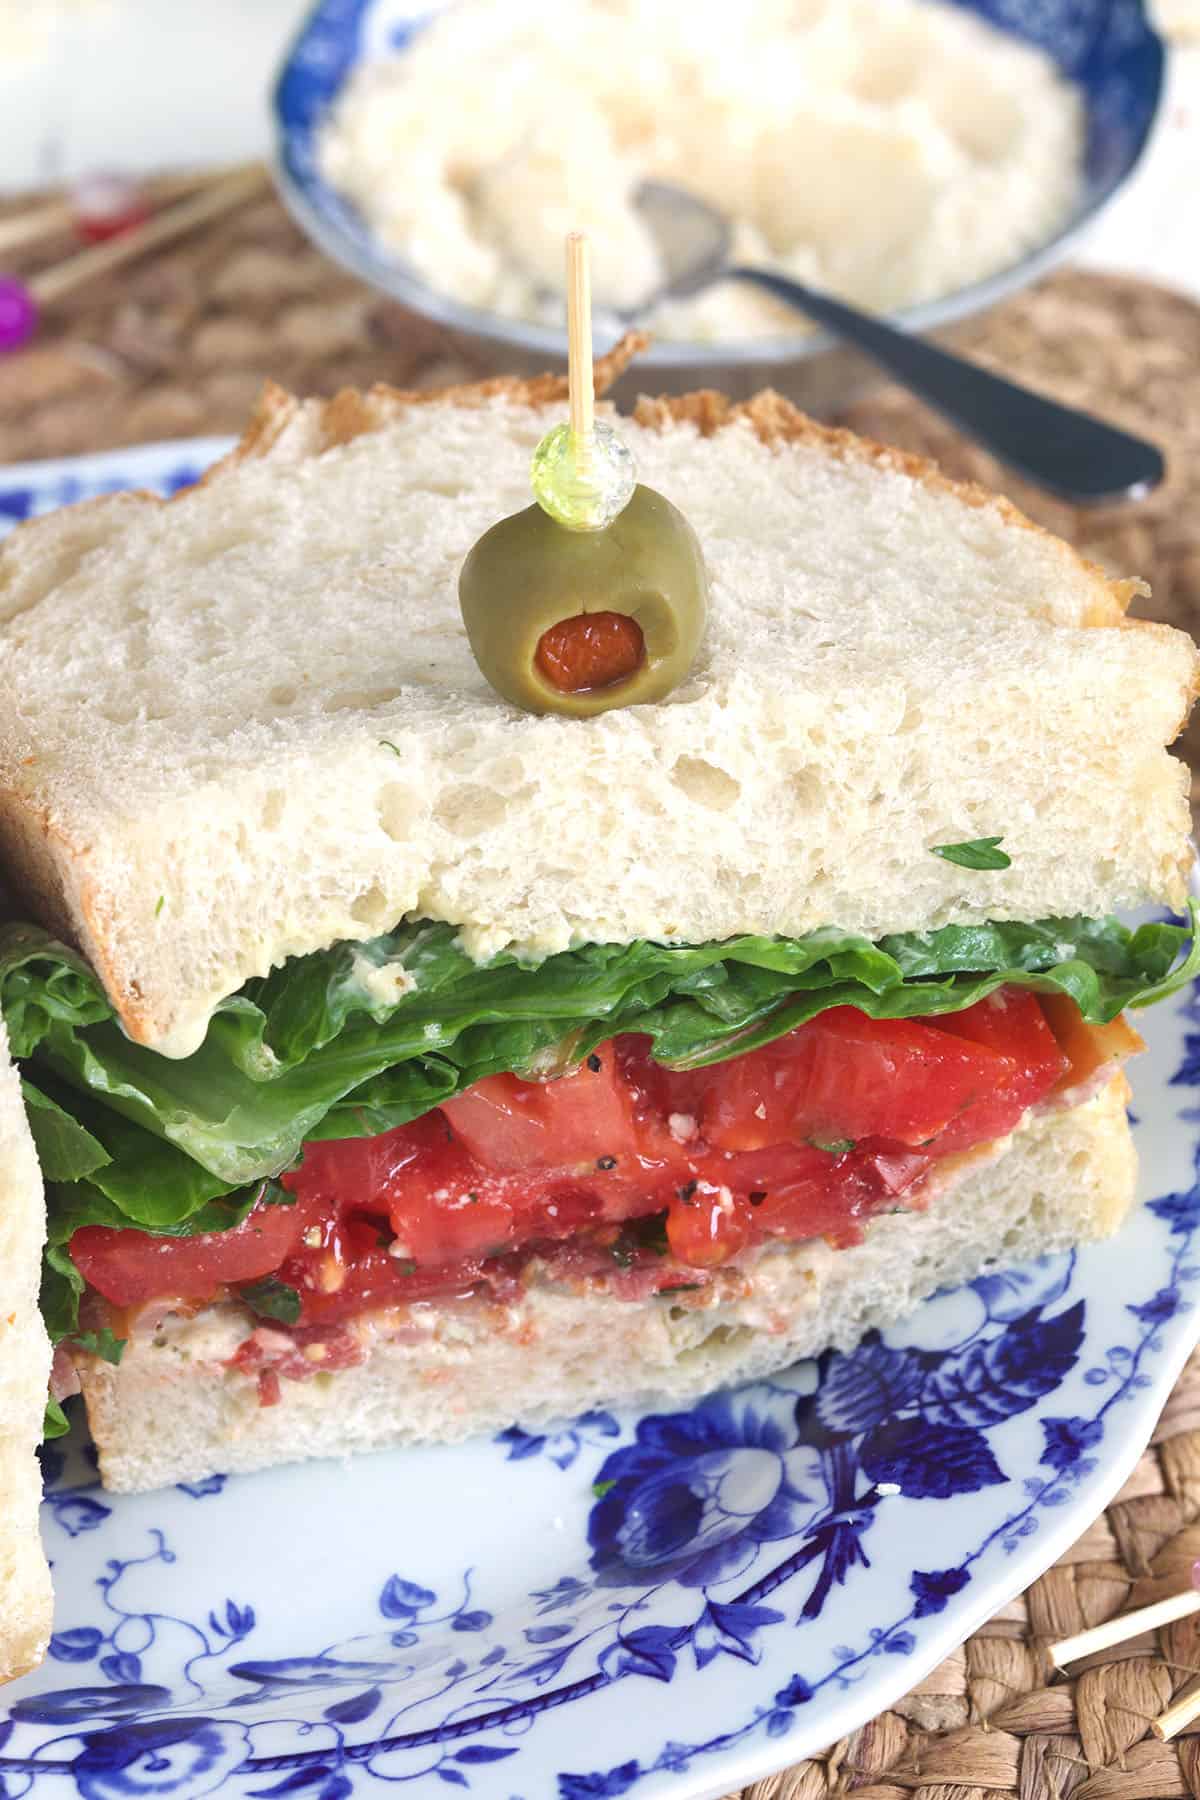 Half a BLT sandwich on a blue and white plate. A toothpick with an olive is inserted into the top of the sandwich.